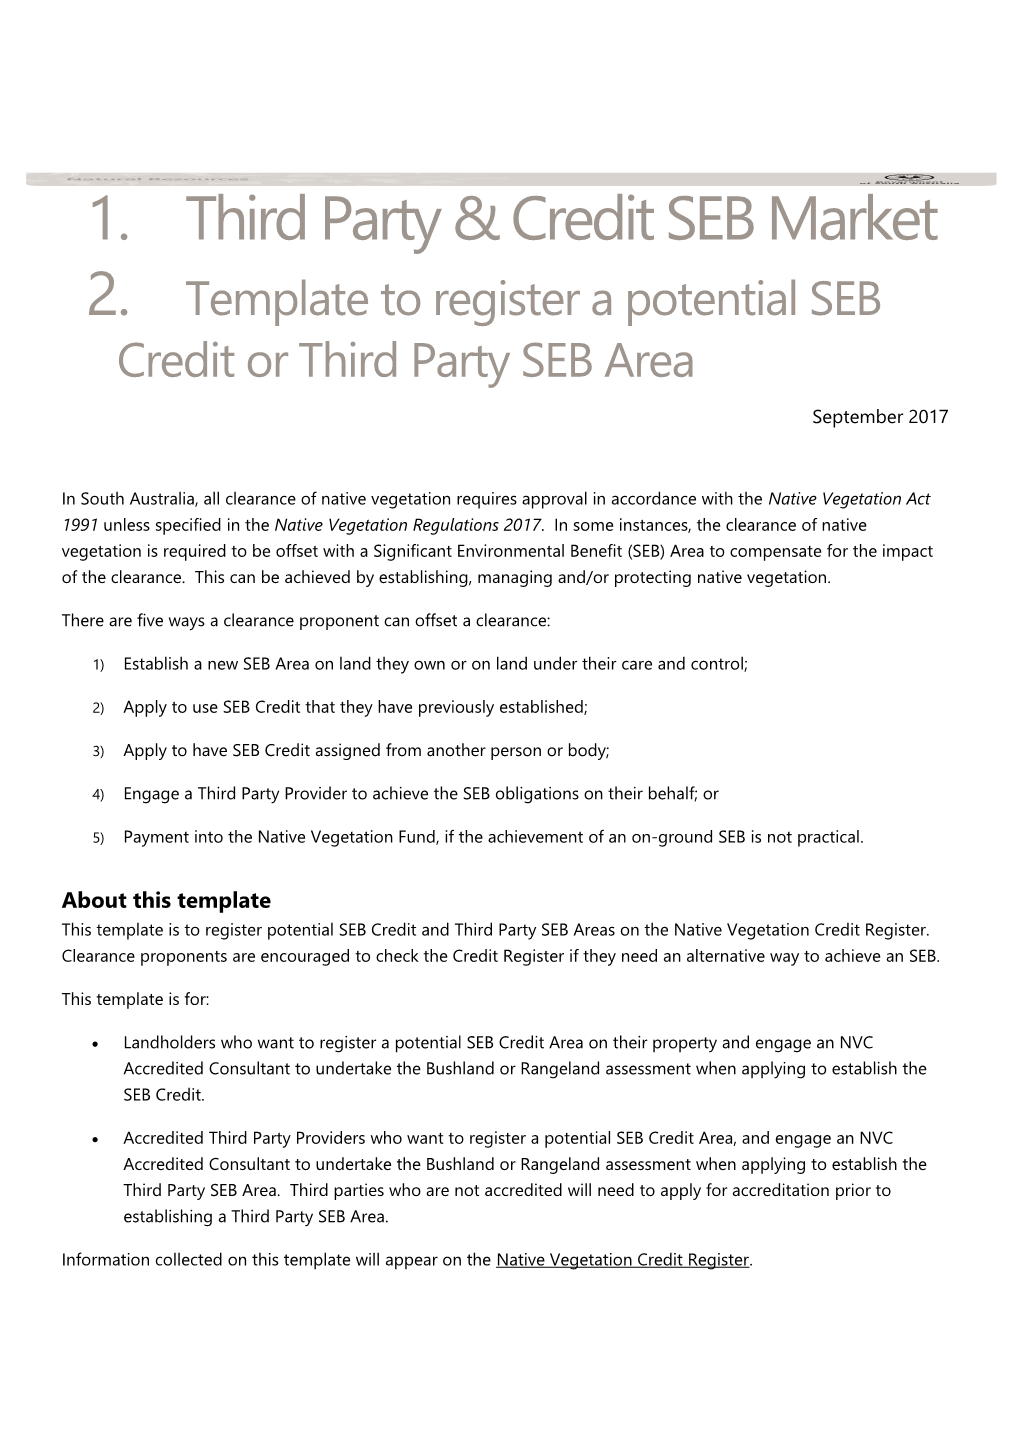 Template to Register a Potential SEB Credit Or Third Party SEB Area